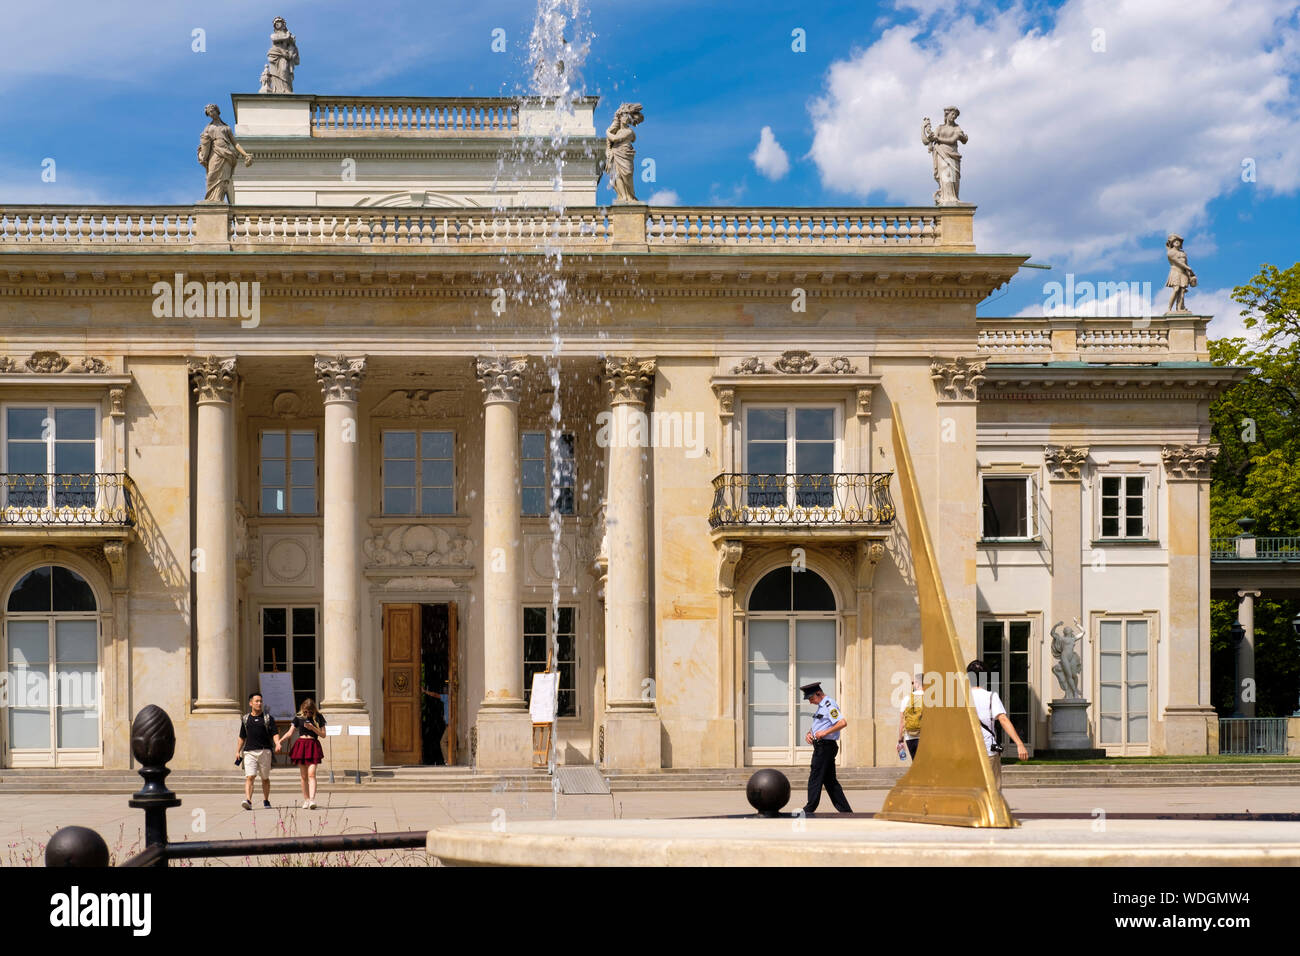 A sundial in front of the Palace on the Water, in Lazienki Park, Warsaw, Poland. Stock Photo